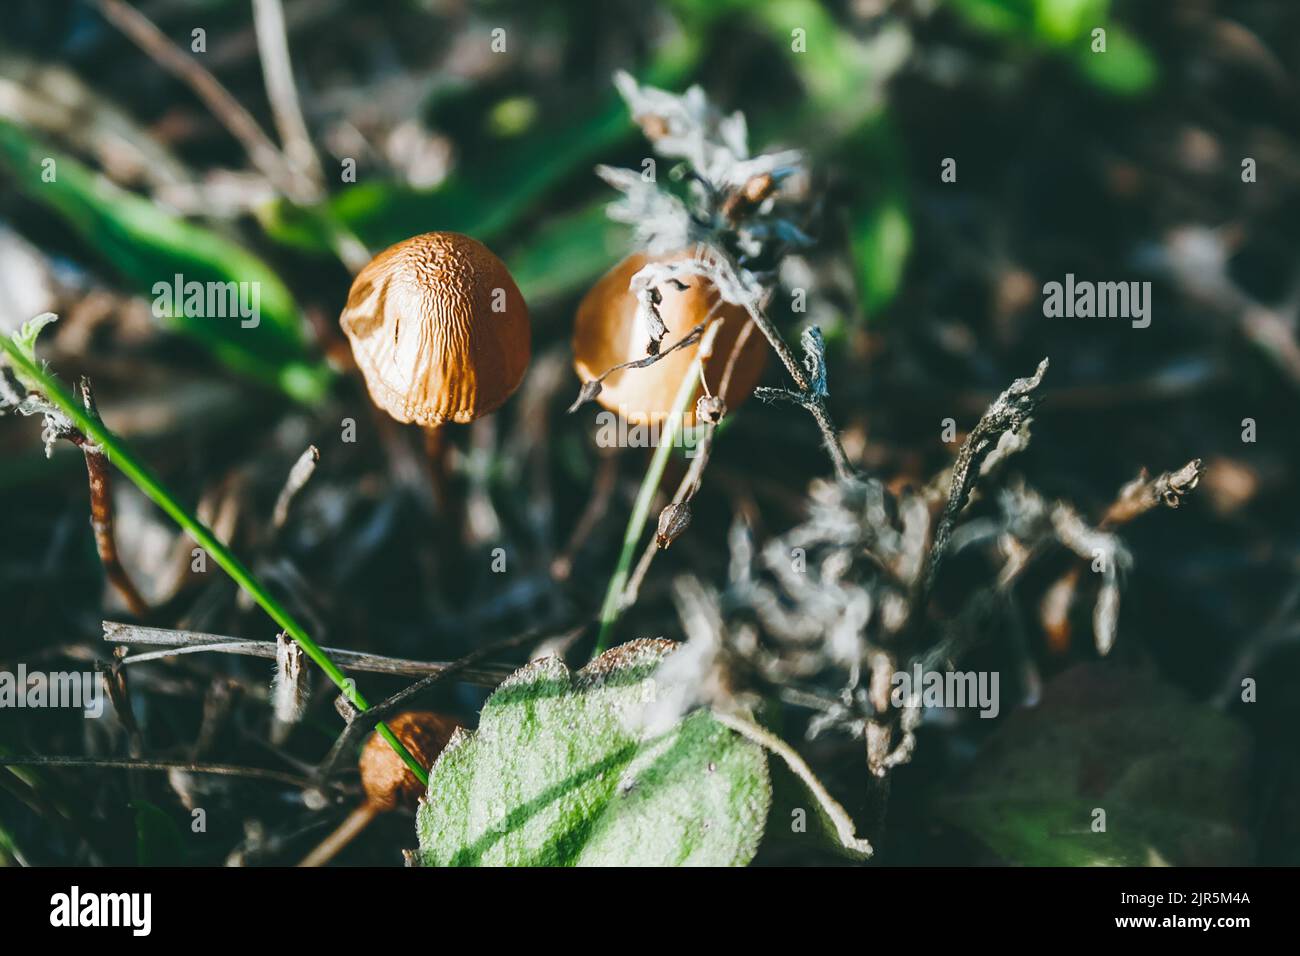 Beautiful small orange mushrooms among dried branches, foliage, mowed grass in mystical autumn misty forest Stock Photo